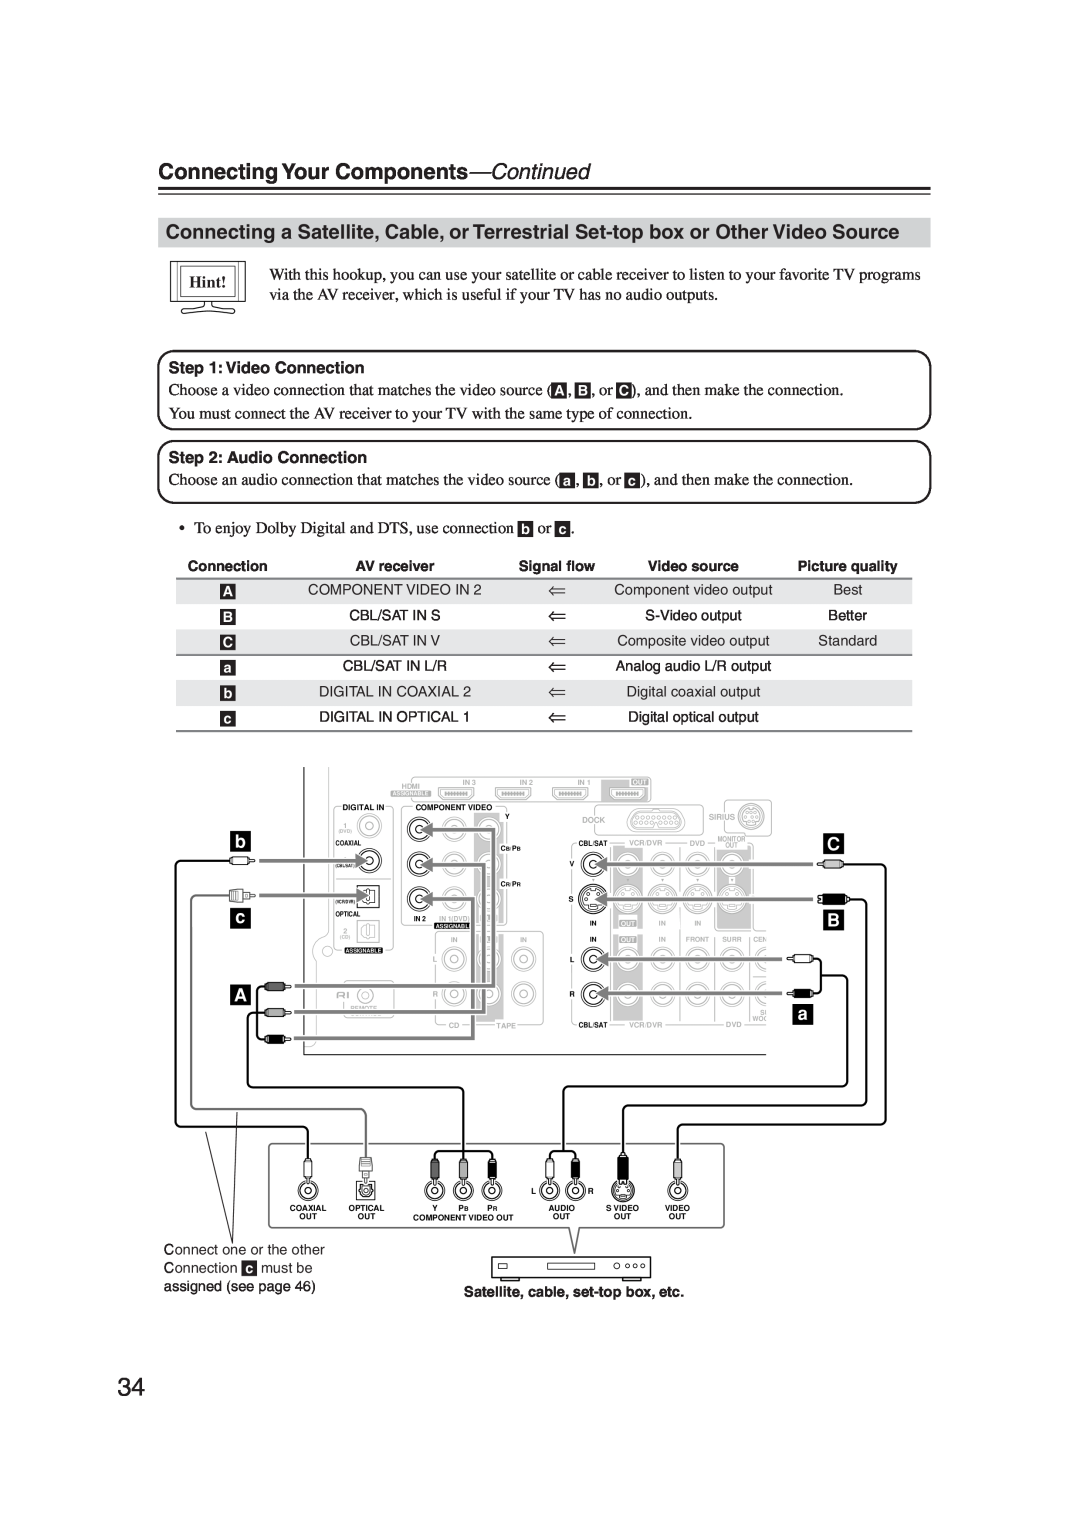 Onkyo S5100 instruction manual Connecting Your Components—Continued, b c A, Hint, Component Video In 